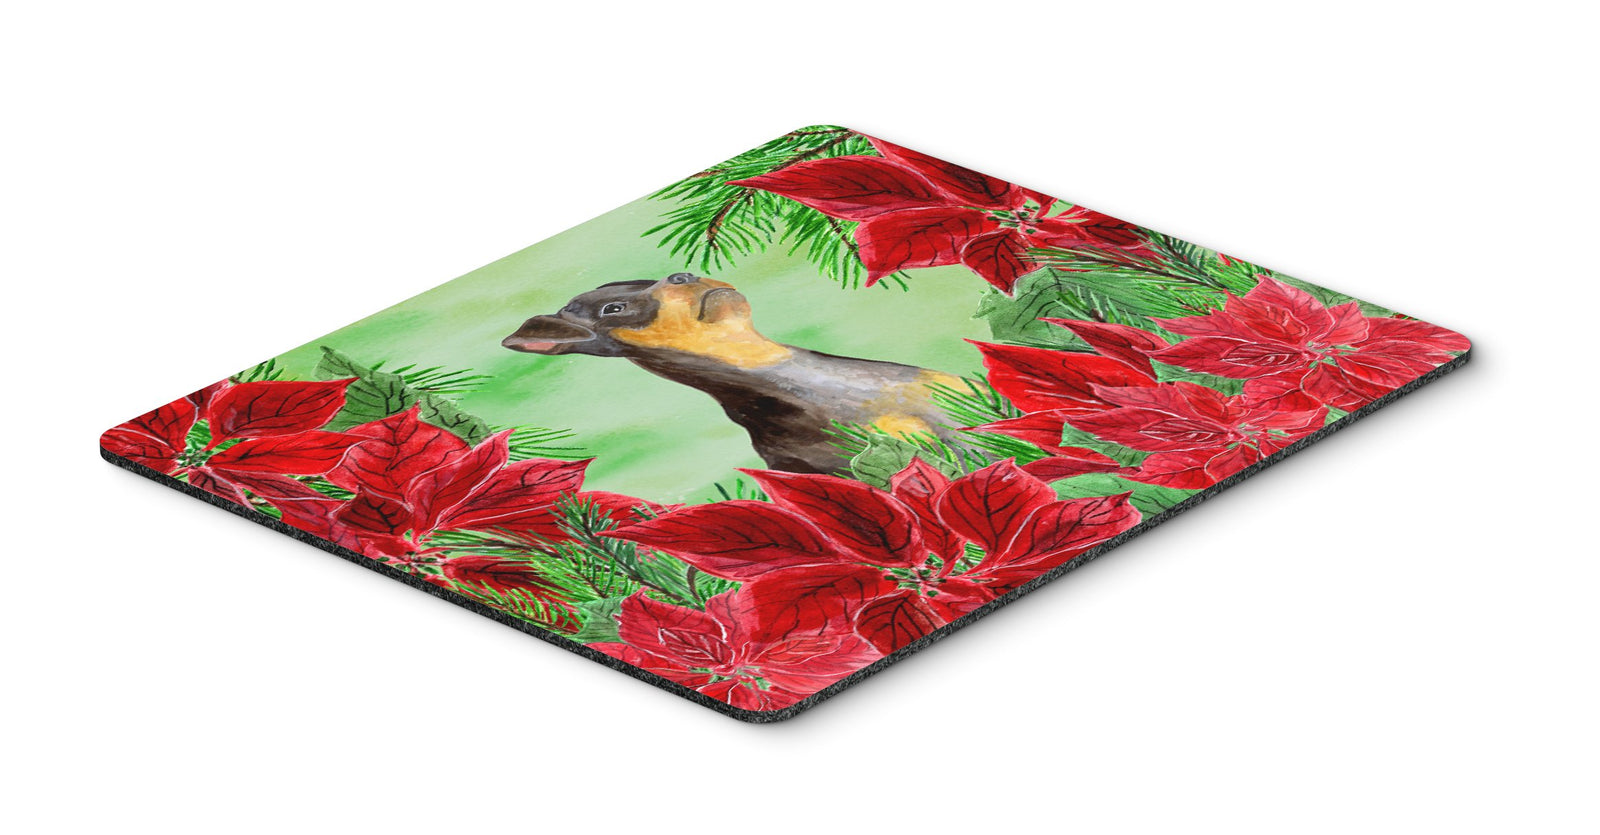 Miniature Pinscher #2 Poinsettas Mouse Pad, Hot Pad or Trivet CK1371MP by Caroline's Treasures